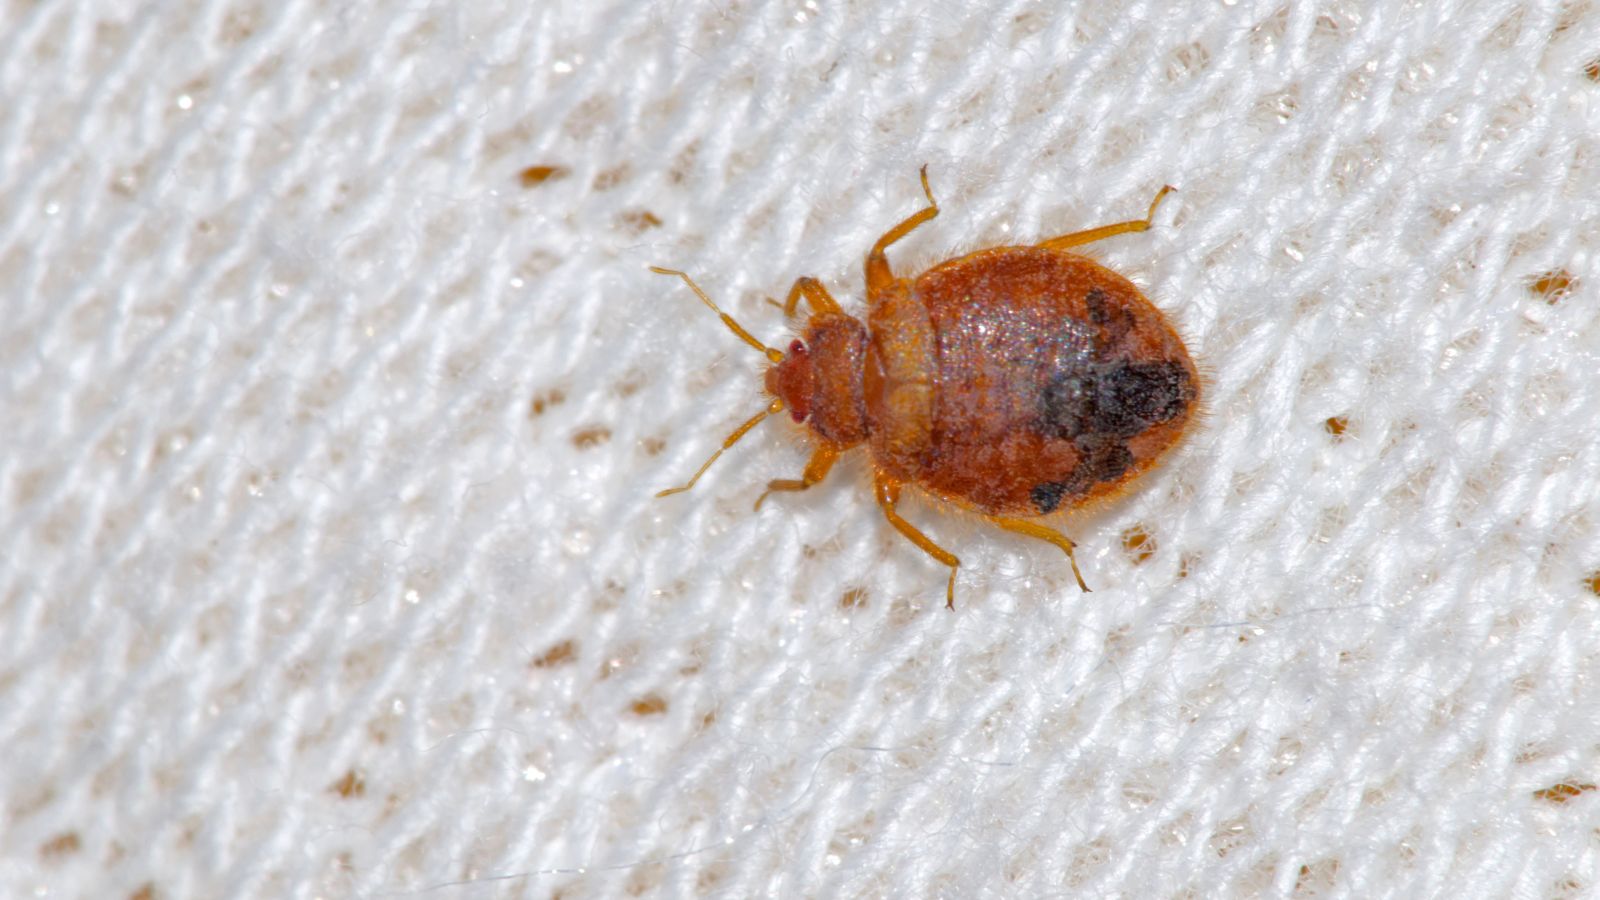 How To Get Rid Of Bed Bugs: Step-By-Step Plan From Entomologists ...